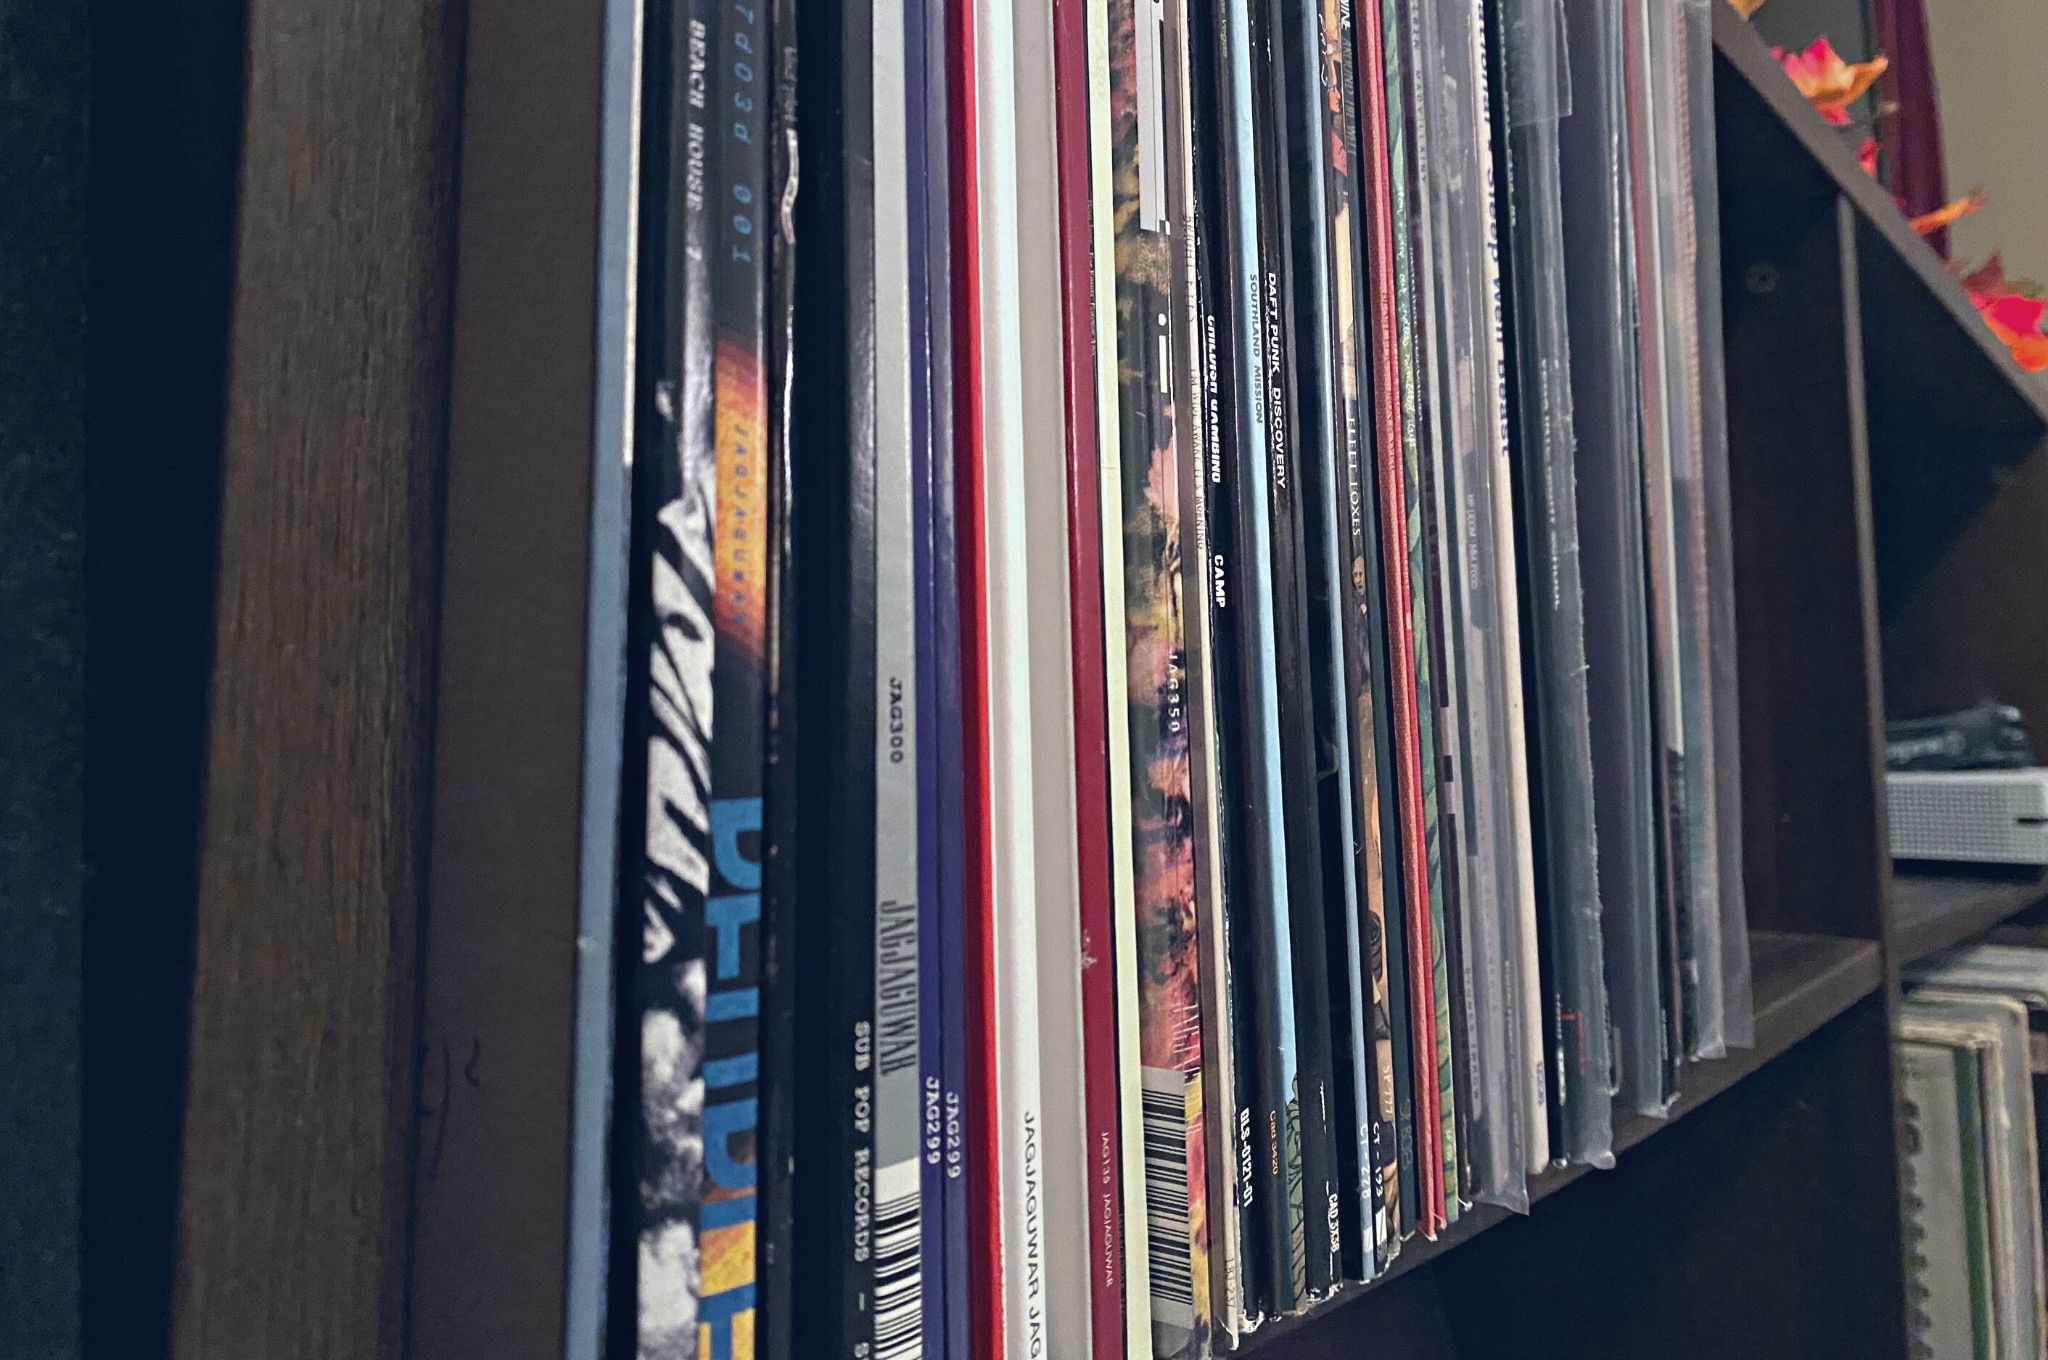 Records neatly stored on a shelf